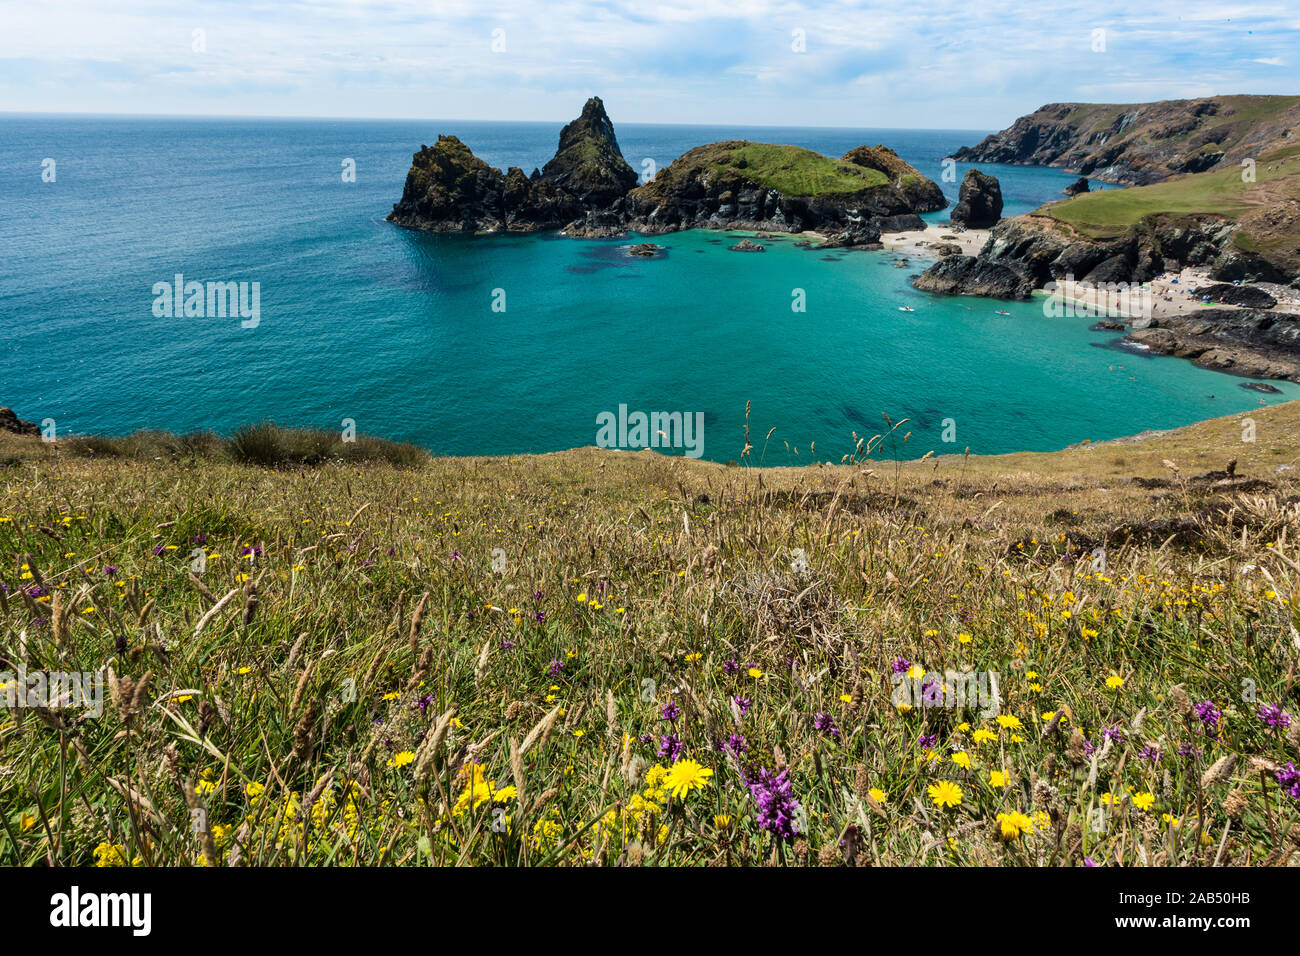 The picturesque and popular tourist destination of Kynance Cove in Cornwall showing the beautiful rugged Cornish landscape with wildflowers at its bes Stock Photo